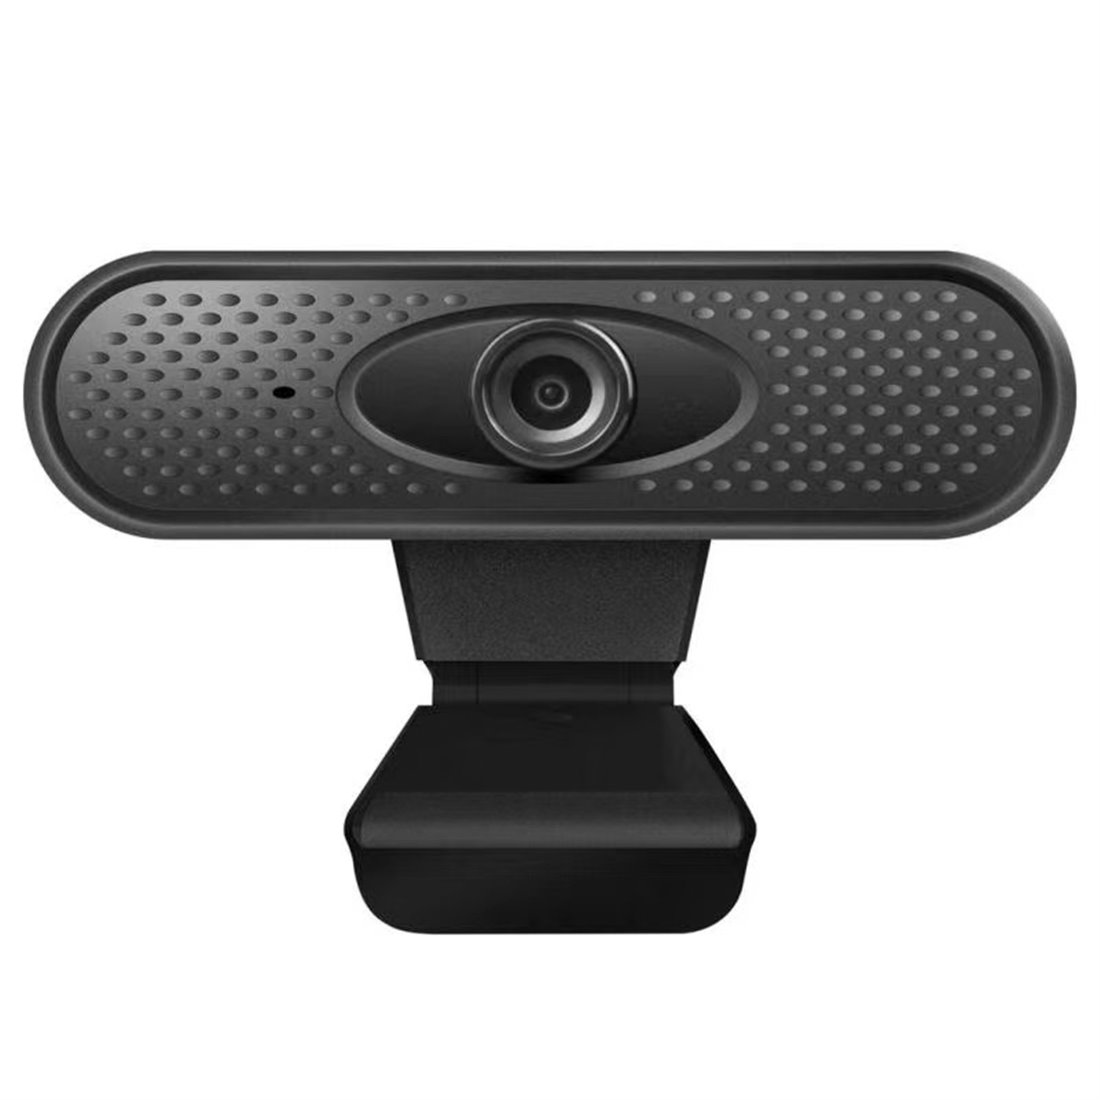 Webcam HD camera for PC and Laptop USB2.0 black